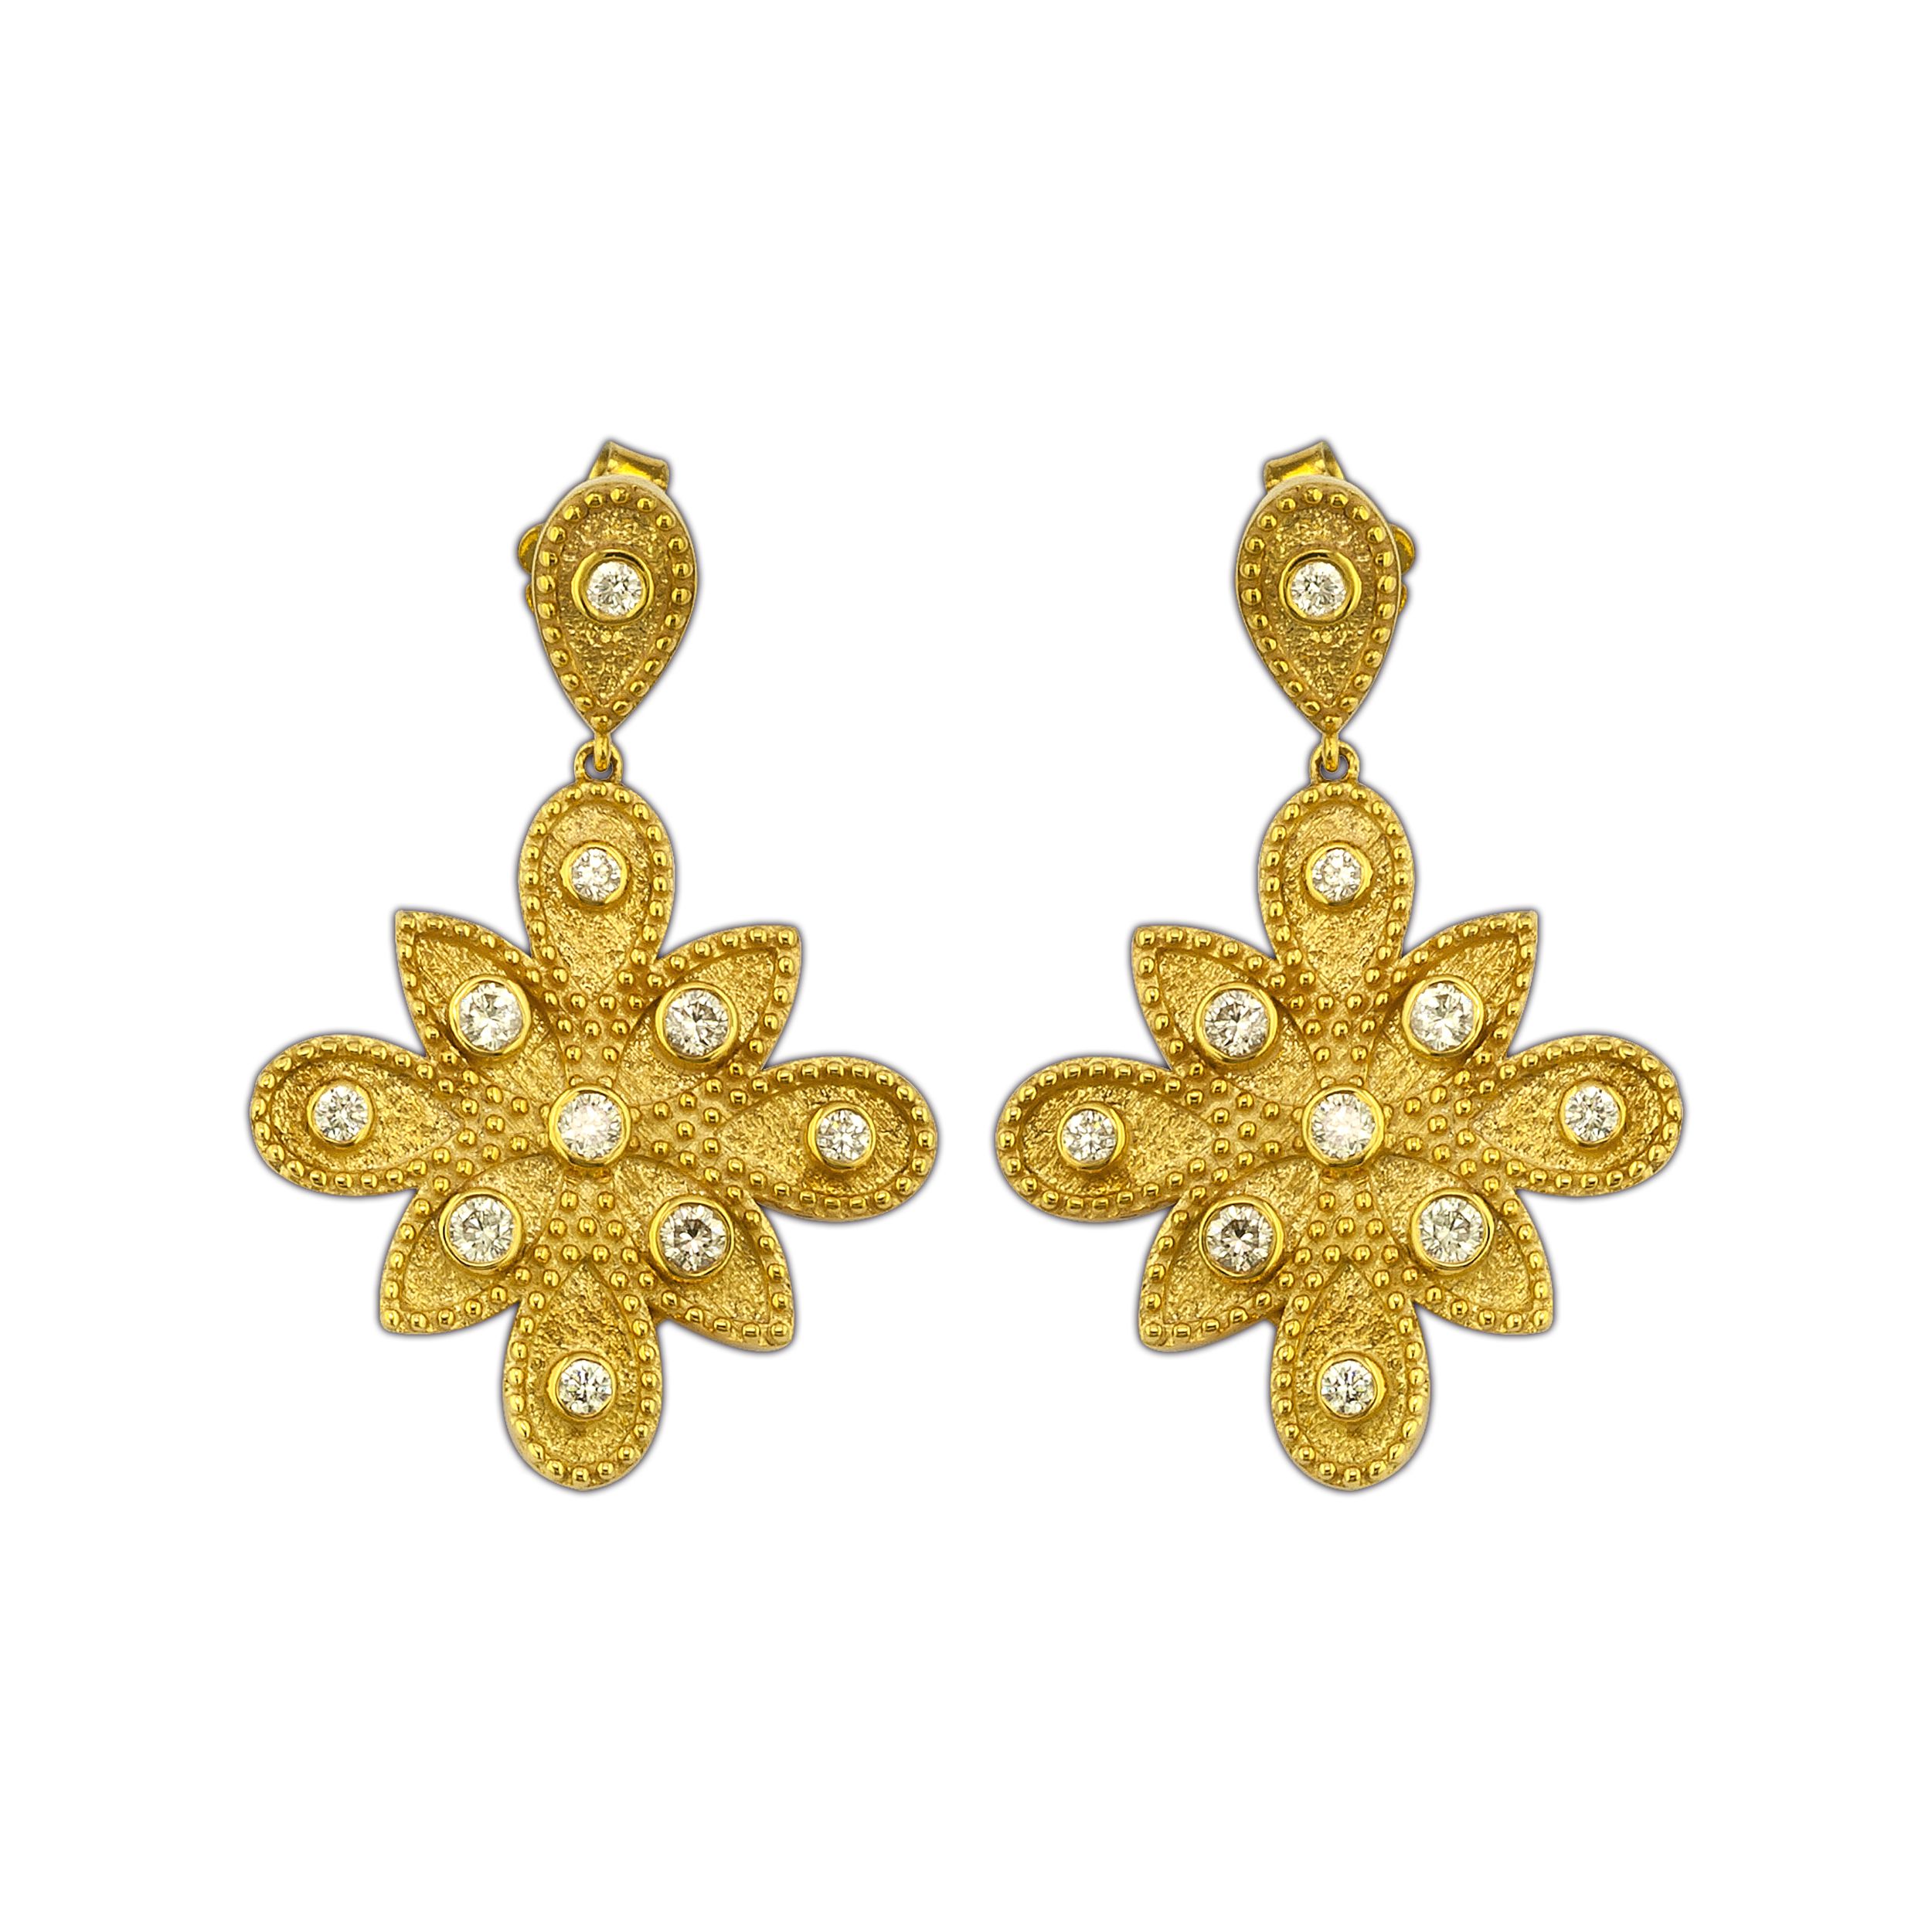 classical earrings made from k18 gold and diamonds